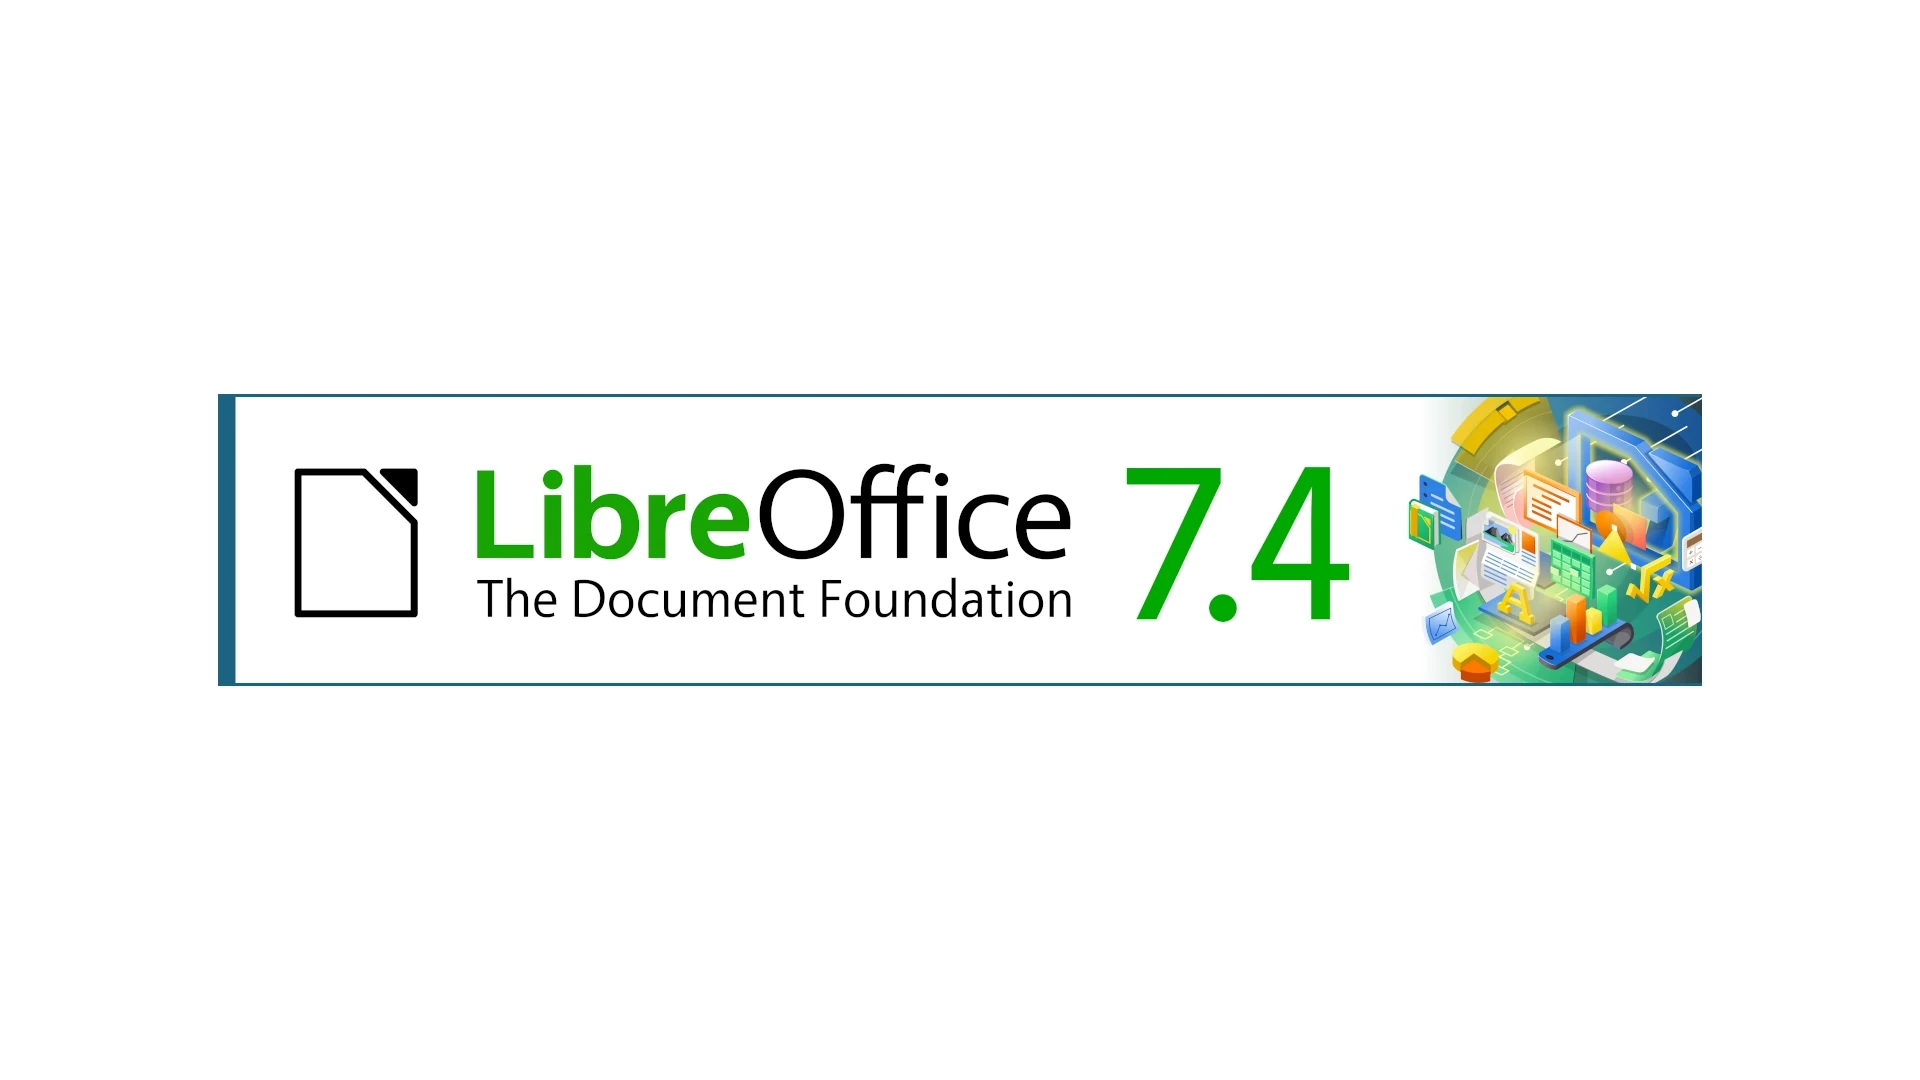 LibreOffice 7.4.7 Is Here as the Last Update in the Series, Upgrade to LibreOffice 7.5 Now